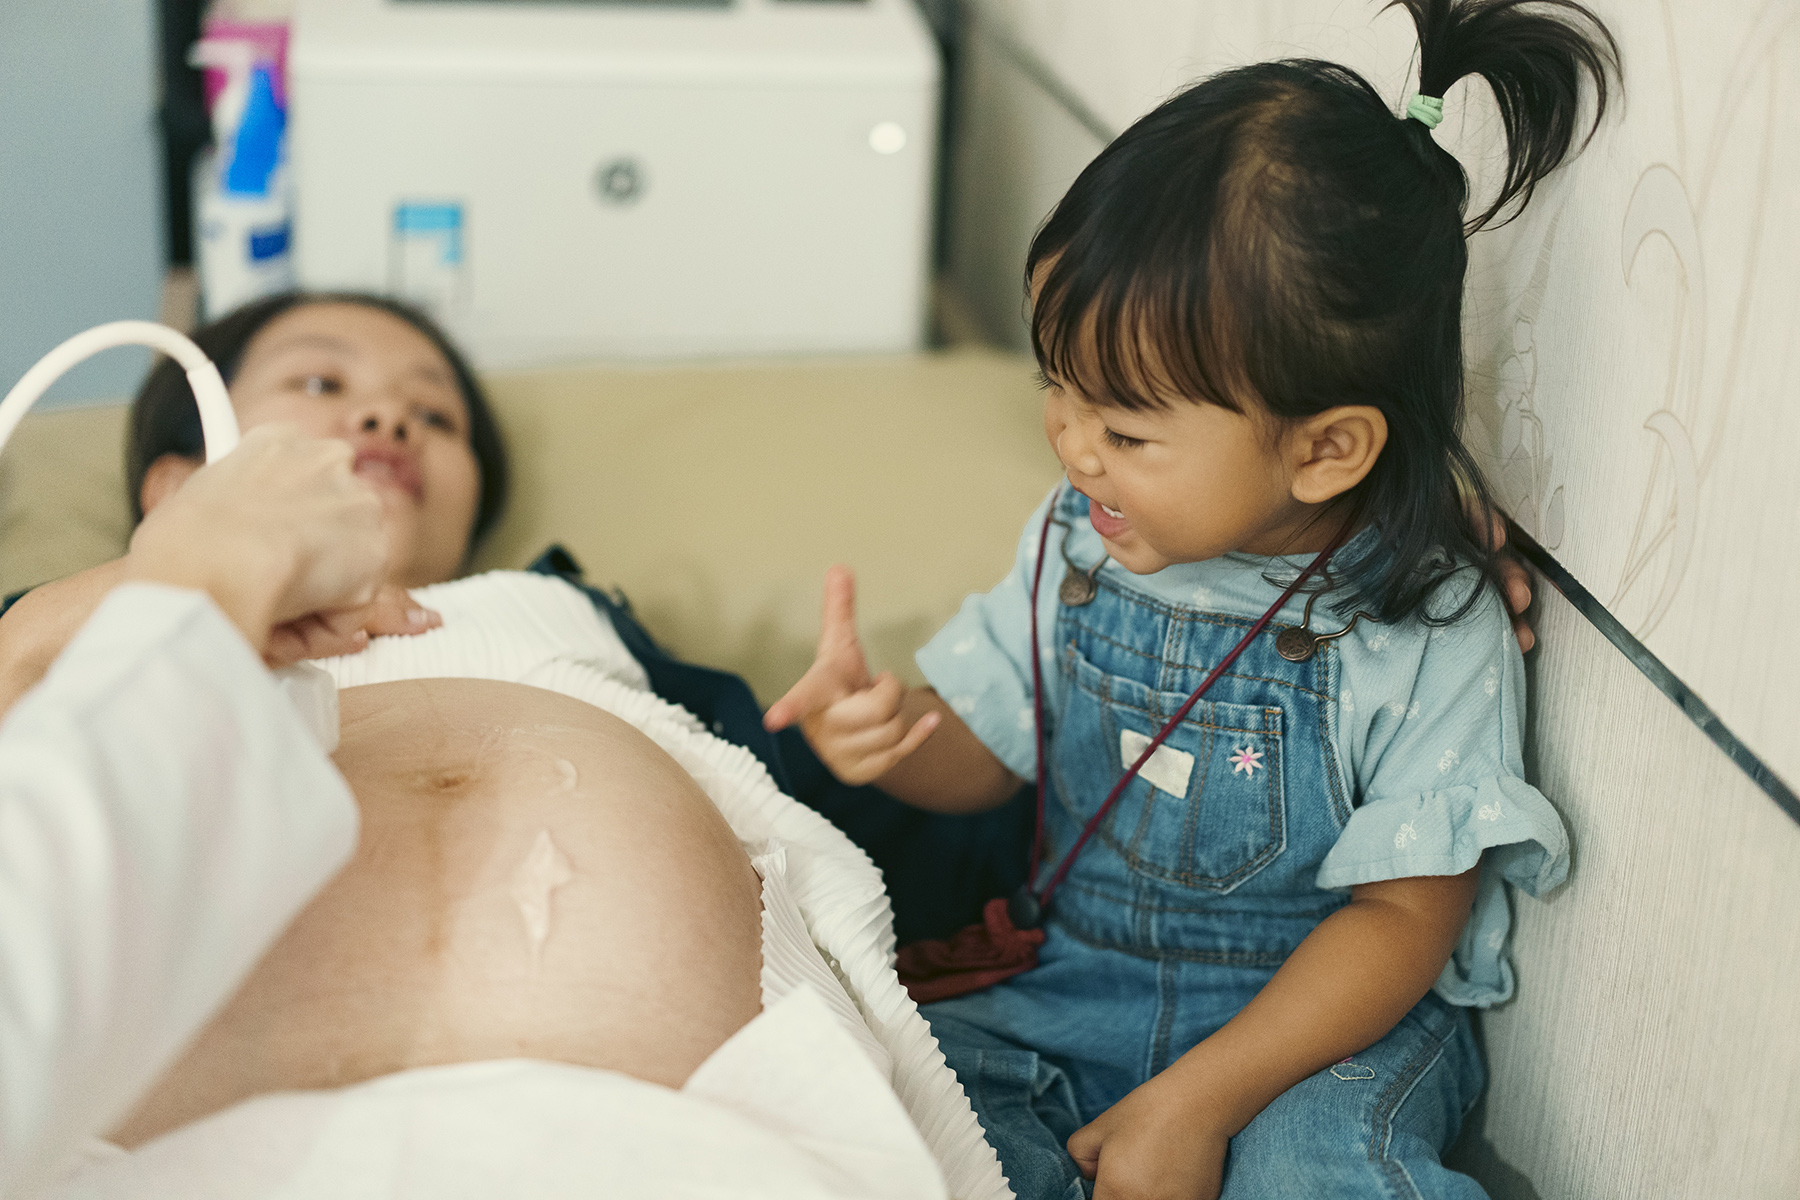 A toddler sits next to her pregnant mom having a ultrasound, she point to her mom's belly